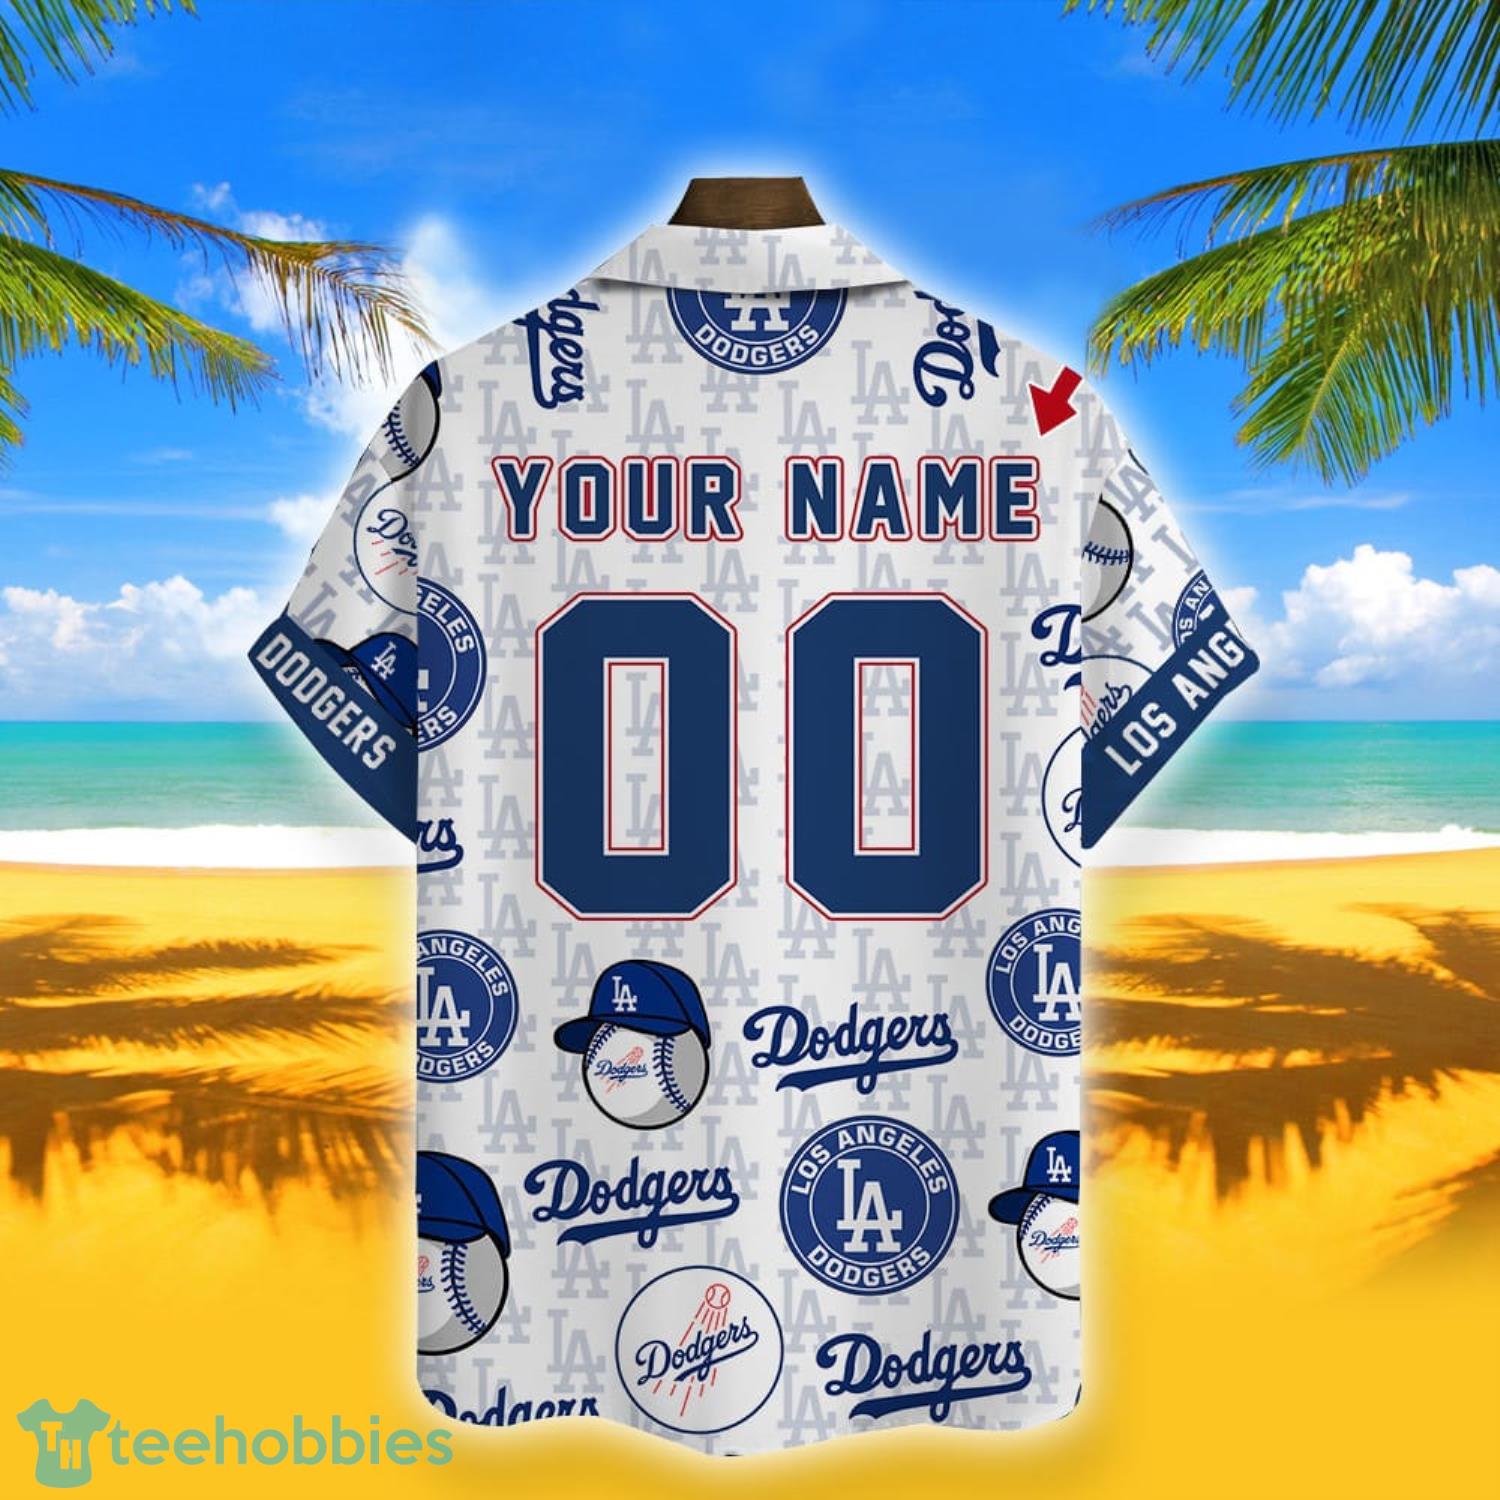 Los Angeles Dodgers MLB Baseball Jersey Shirt Custom Name And Number For  Fans